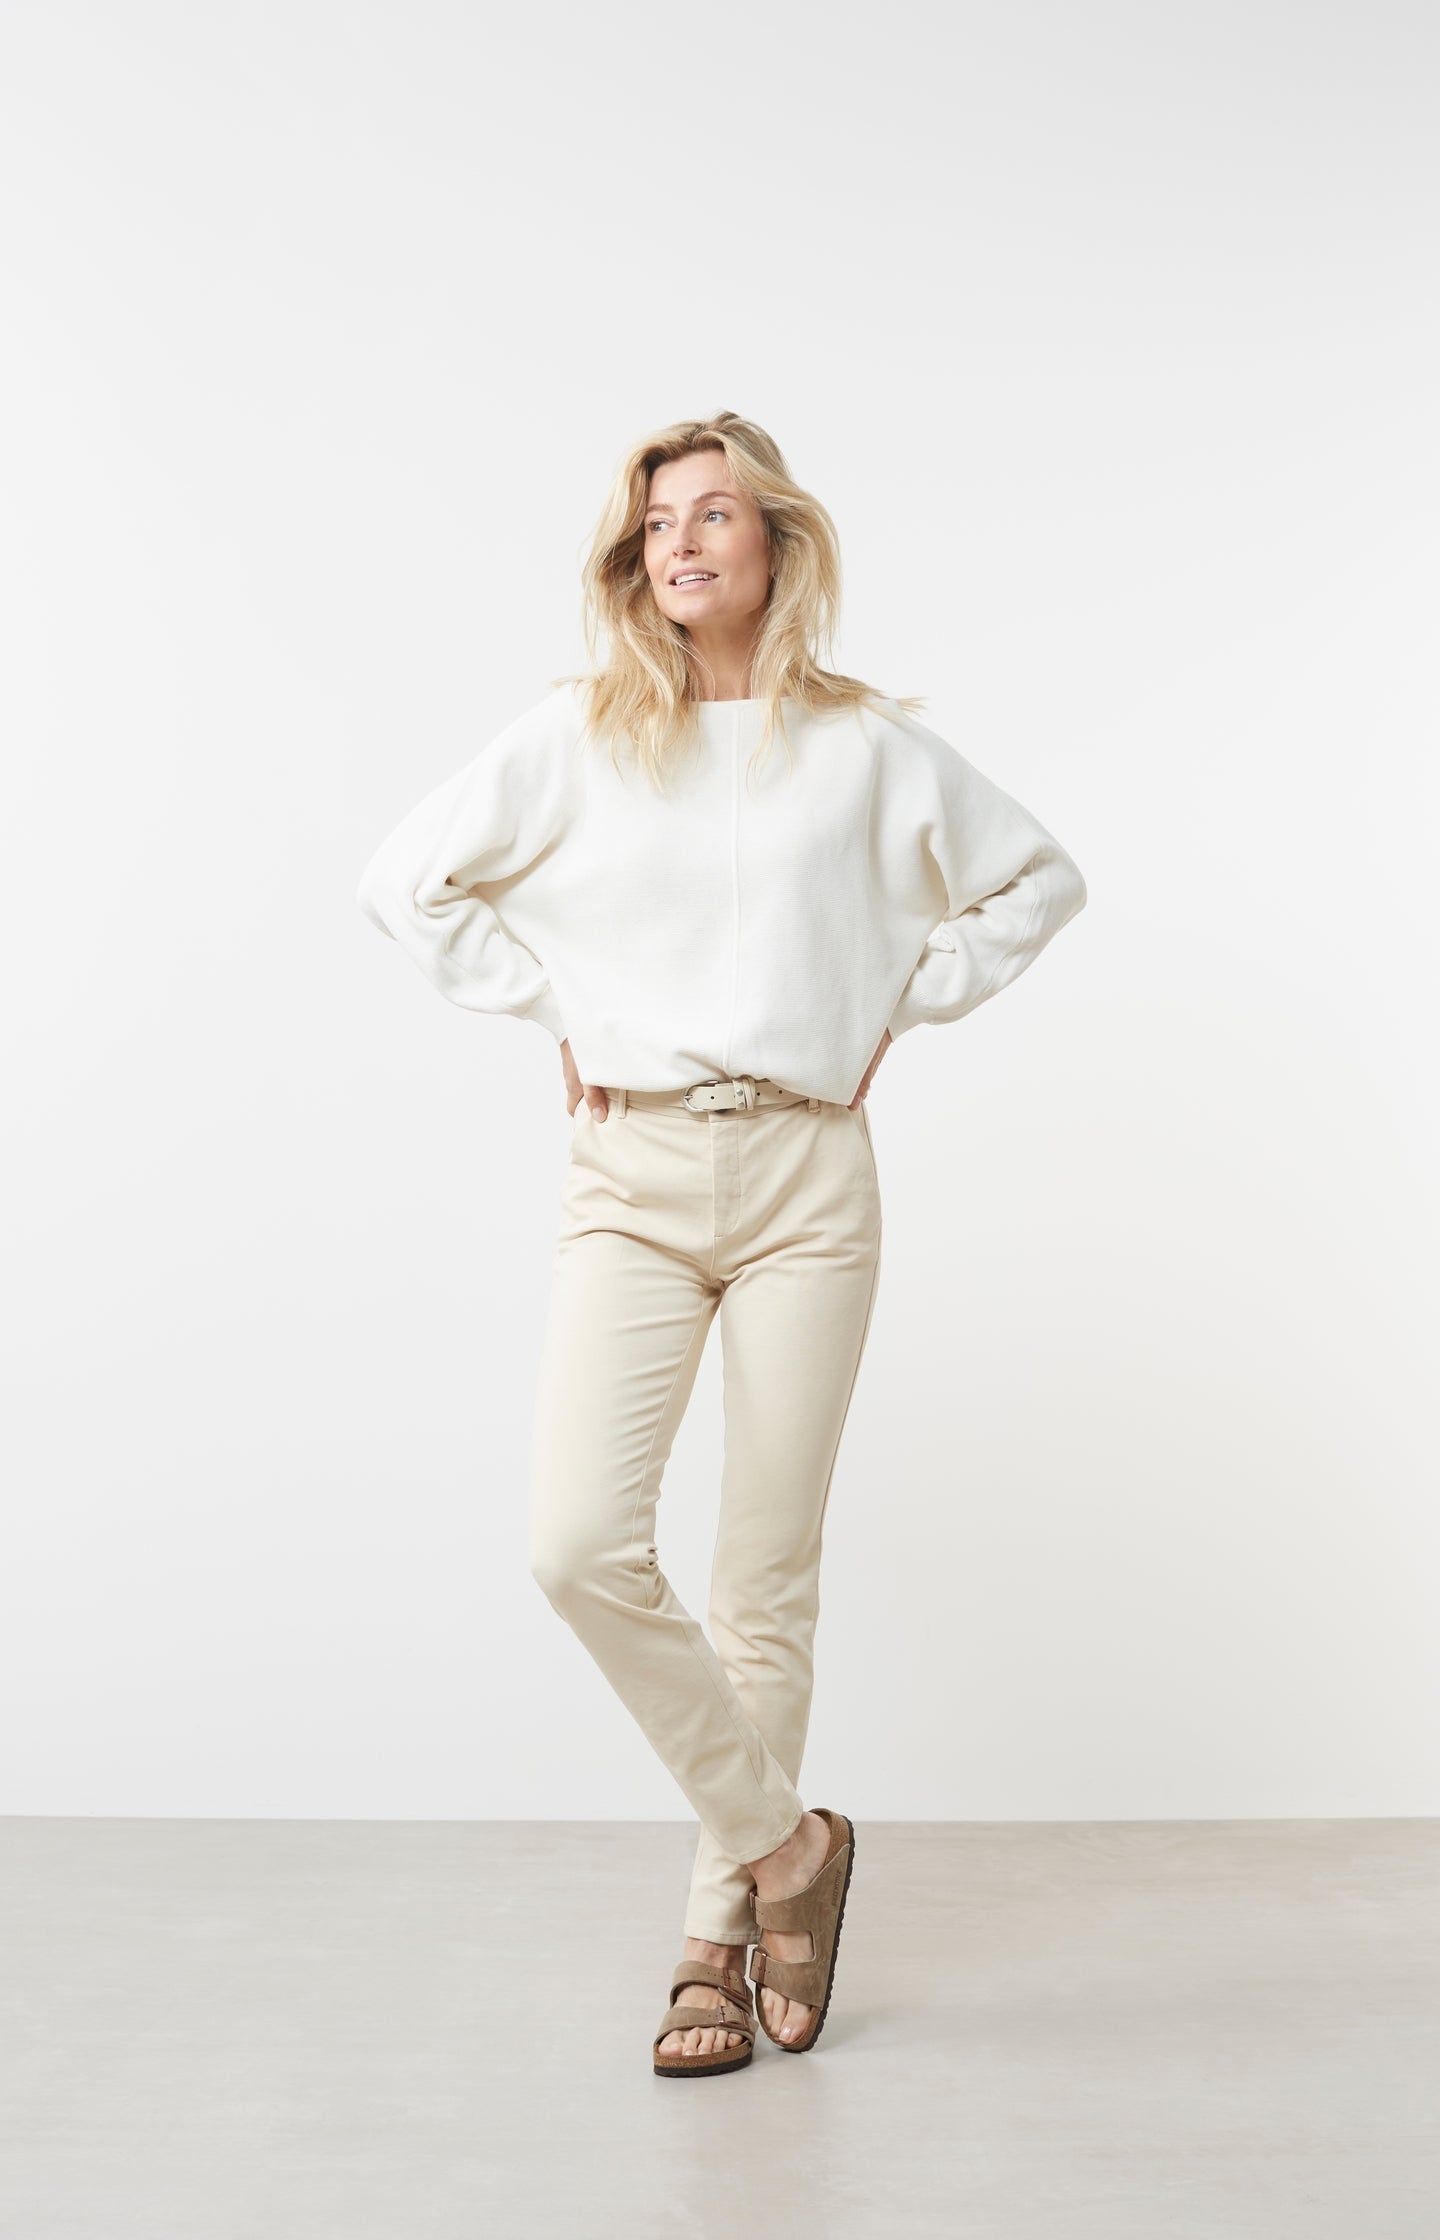 Boatneck sweater with long batwing sleeves in a relaxed fit